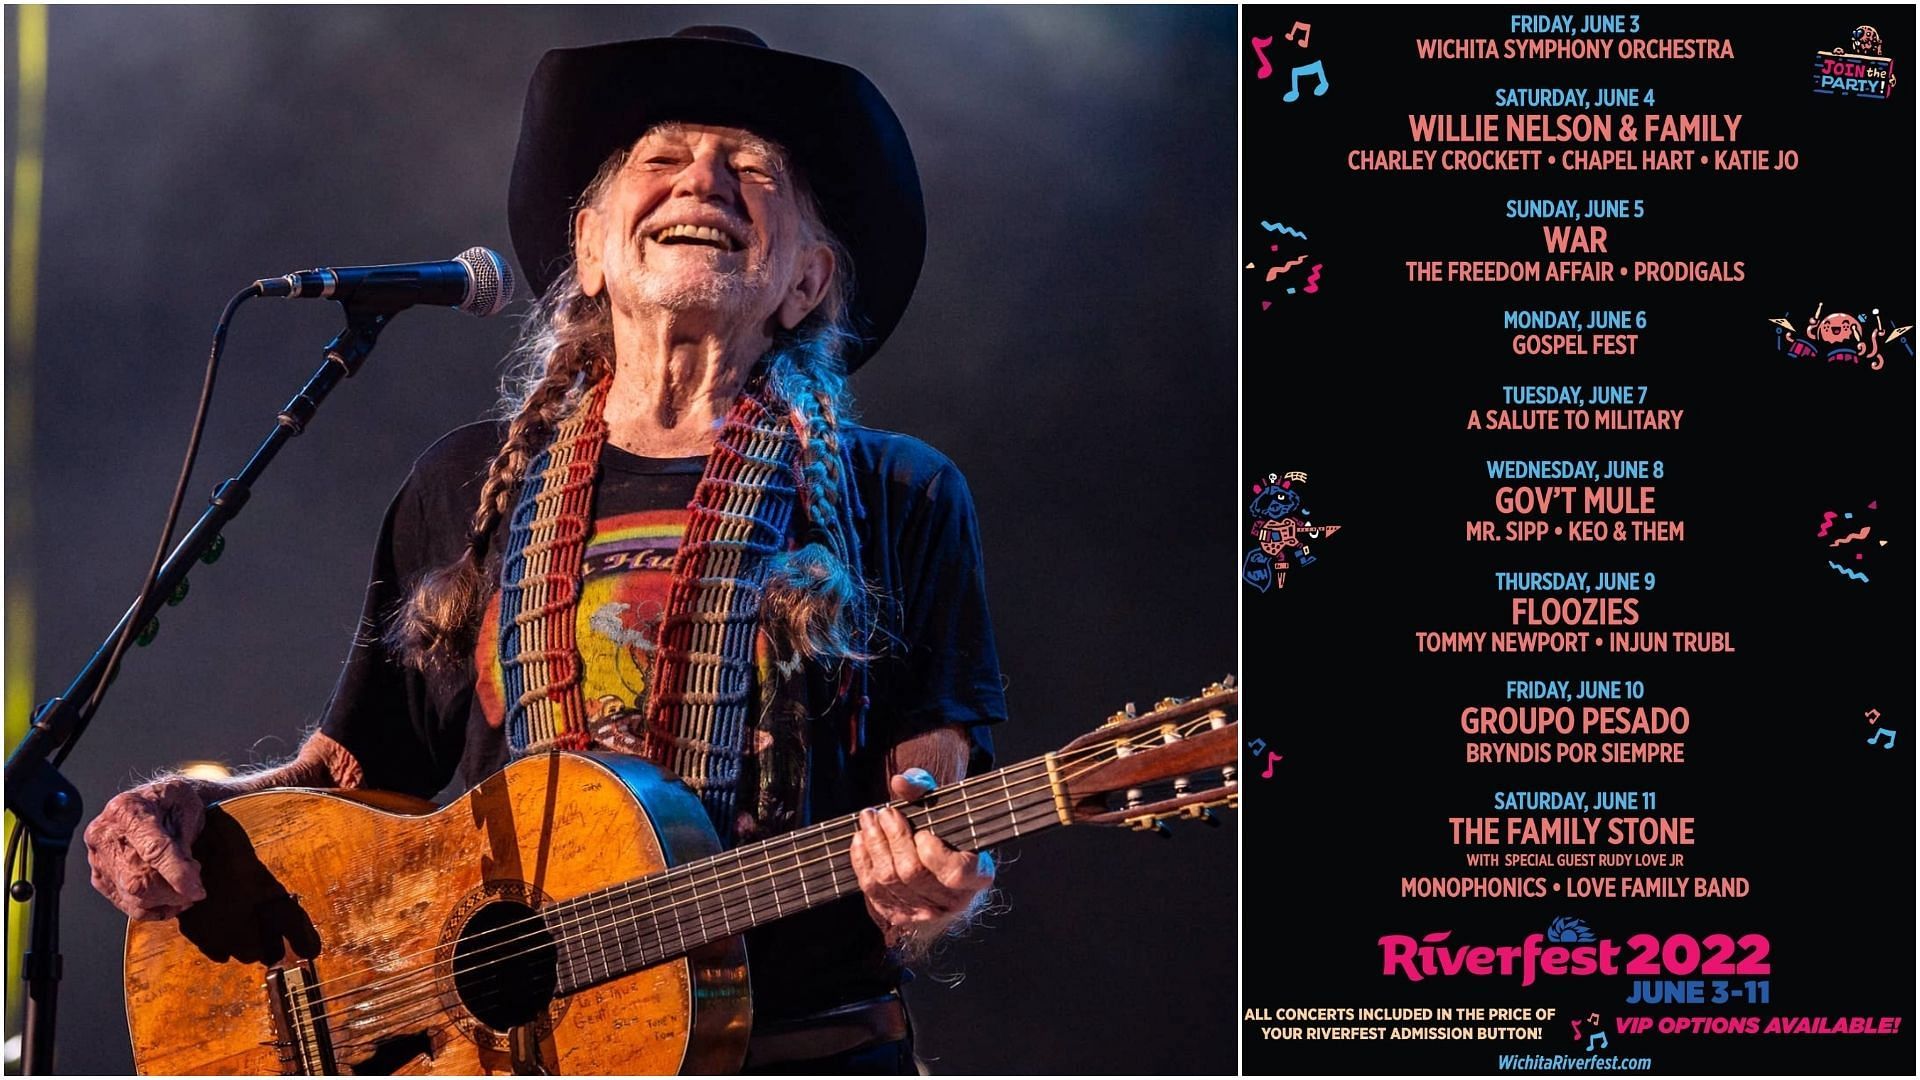 Willie Nelson is among the headliners at the Wichita Riverfest this year. (Images via Instagram / @willienelsonofficial and Facebook / @Wichita Riverfest)